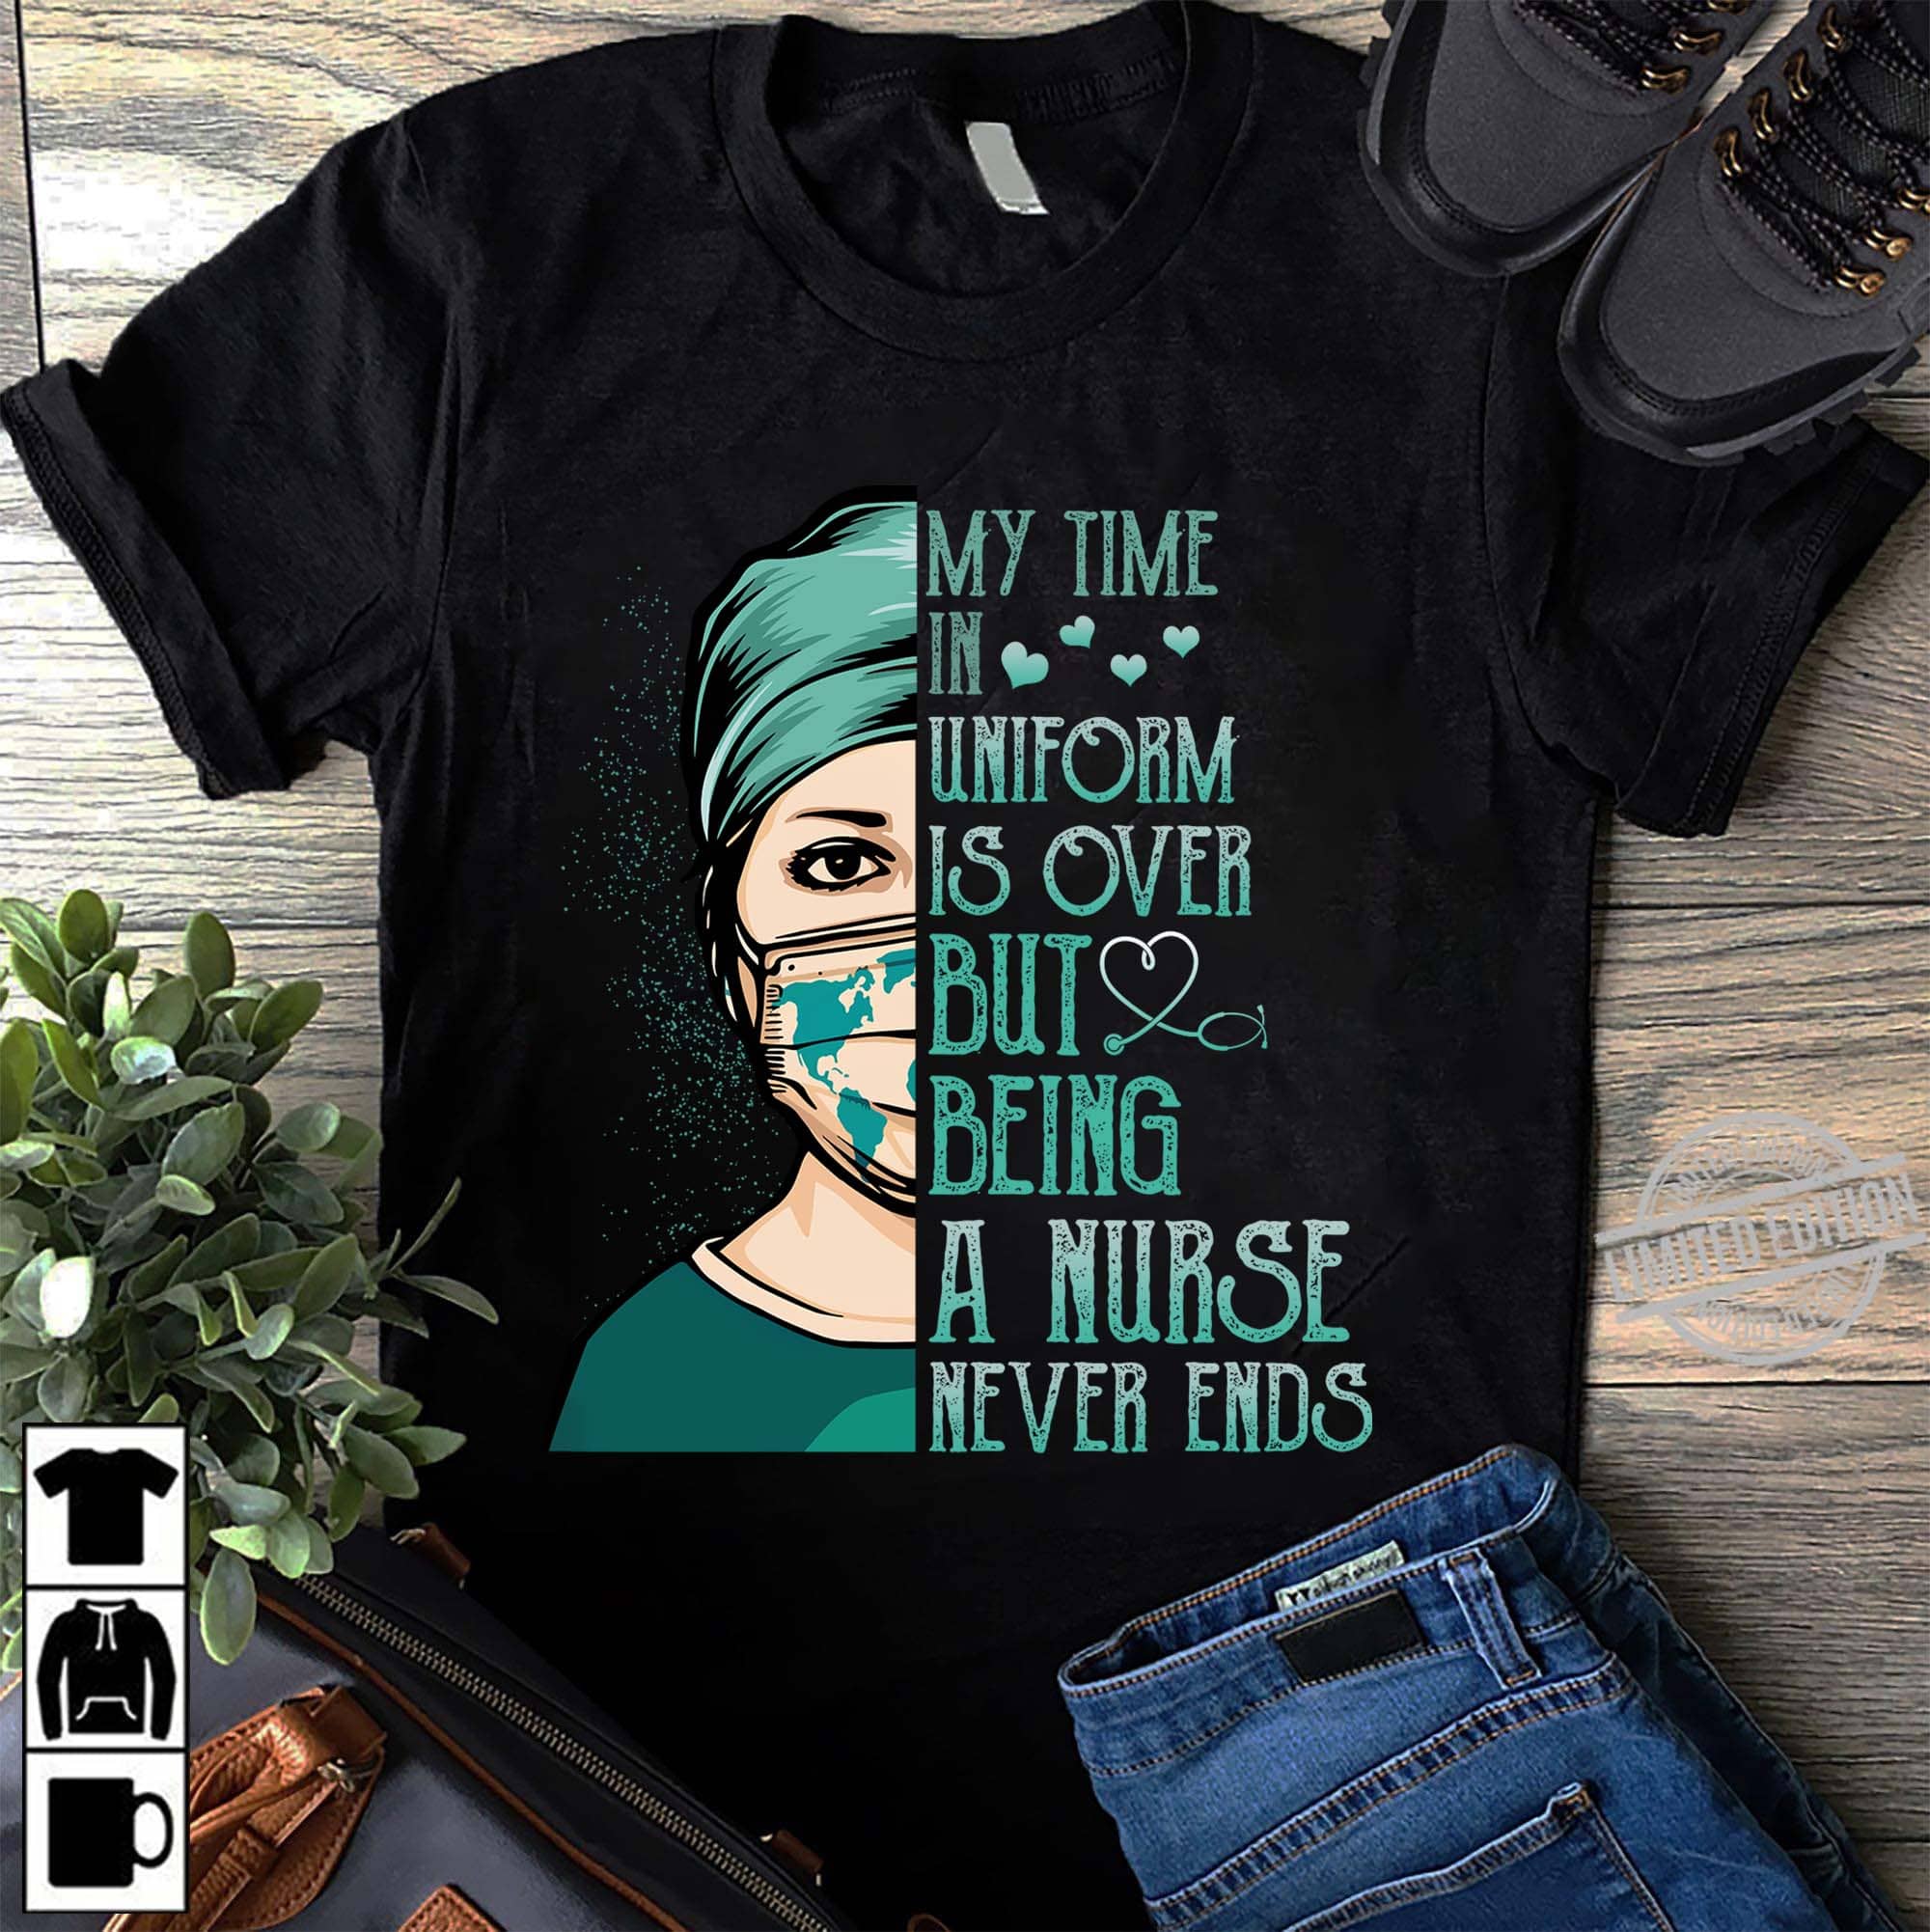 Nurse Wear Medical Mask - My time in uniform is over but being a nurse never ends